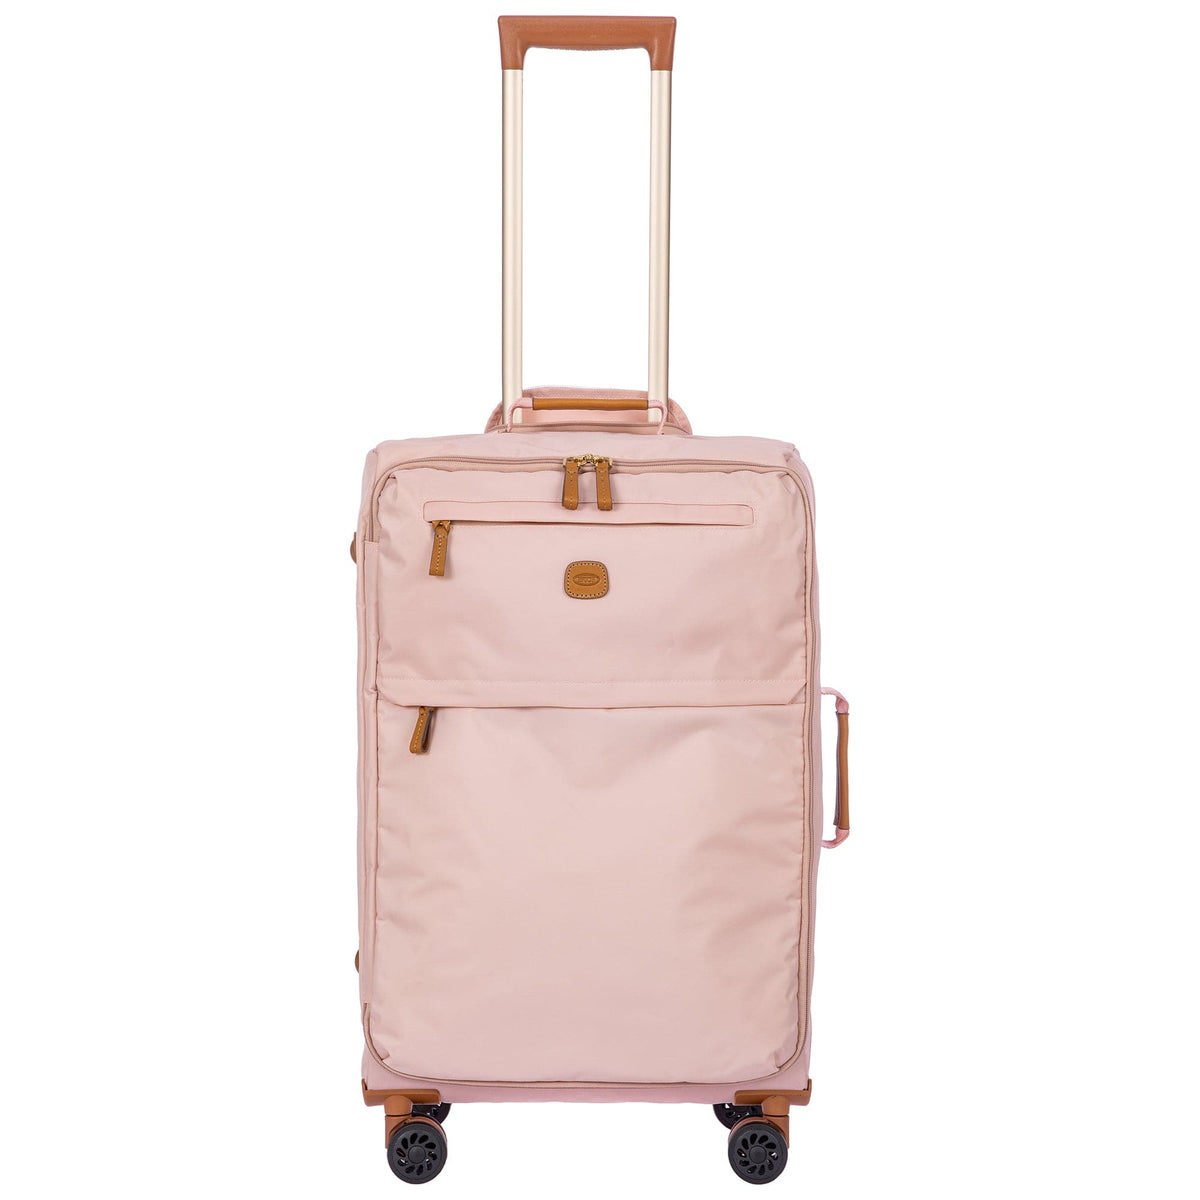 Bric's X-Bag/X-Travel 25" Carry-On Spinner with Frame Luggage